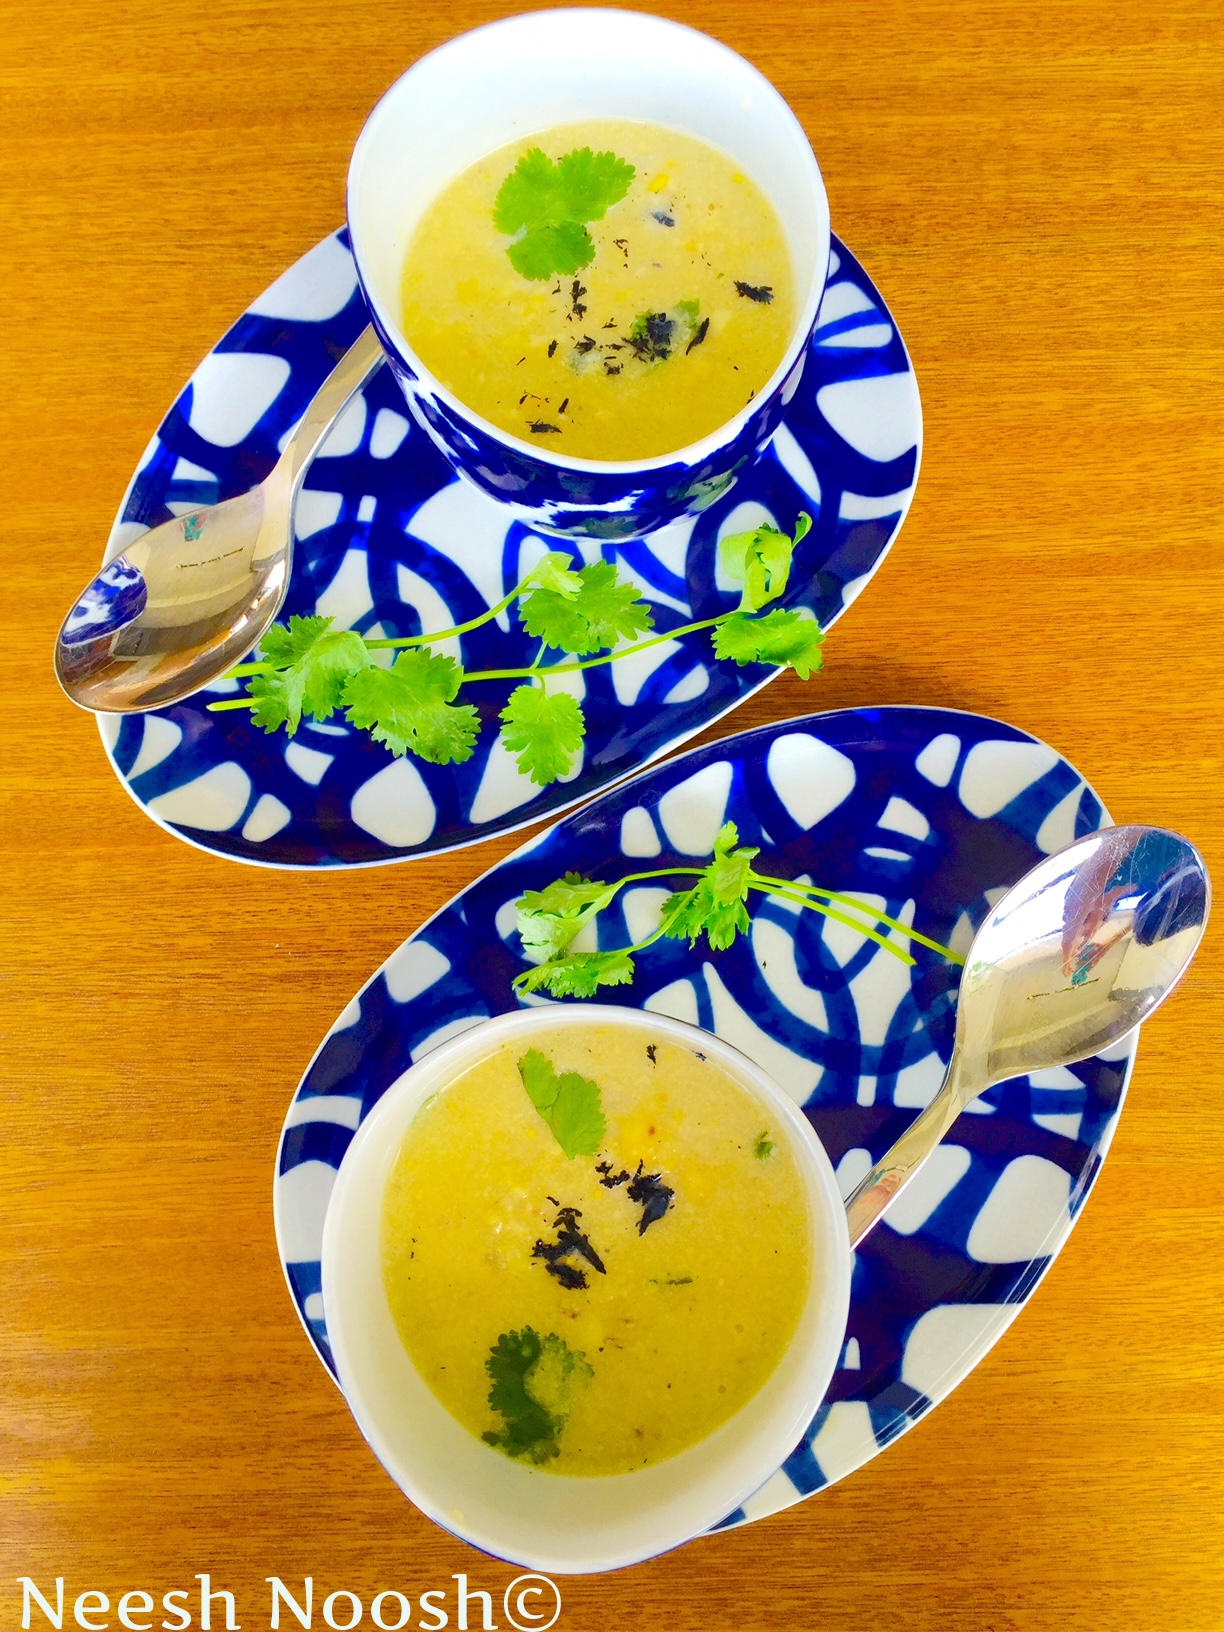 Blue and white abstract plates with small bowls of yellow soup and cilantro all on an orangish wood table.